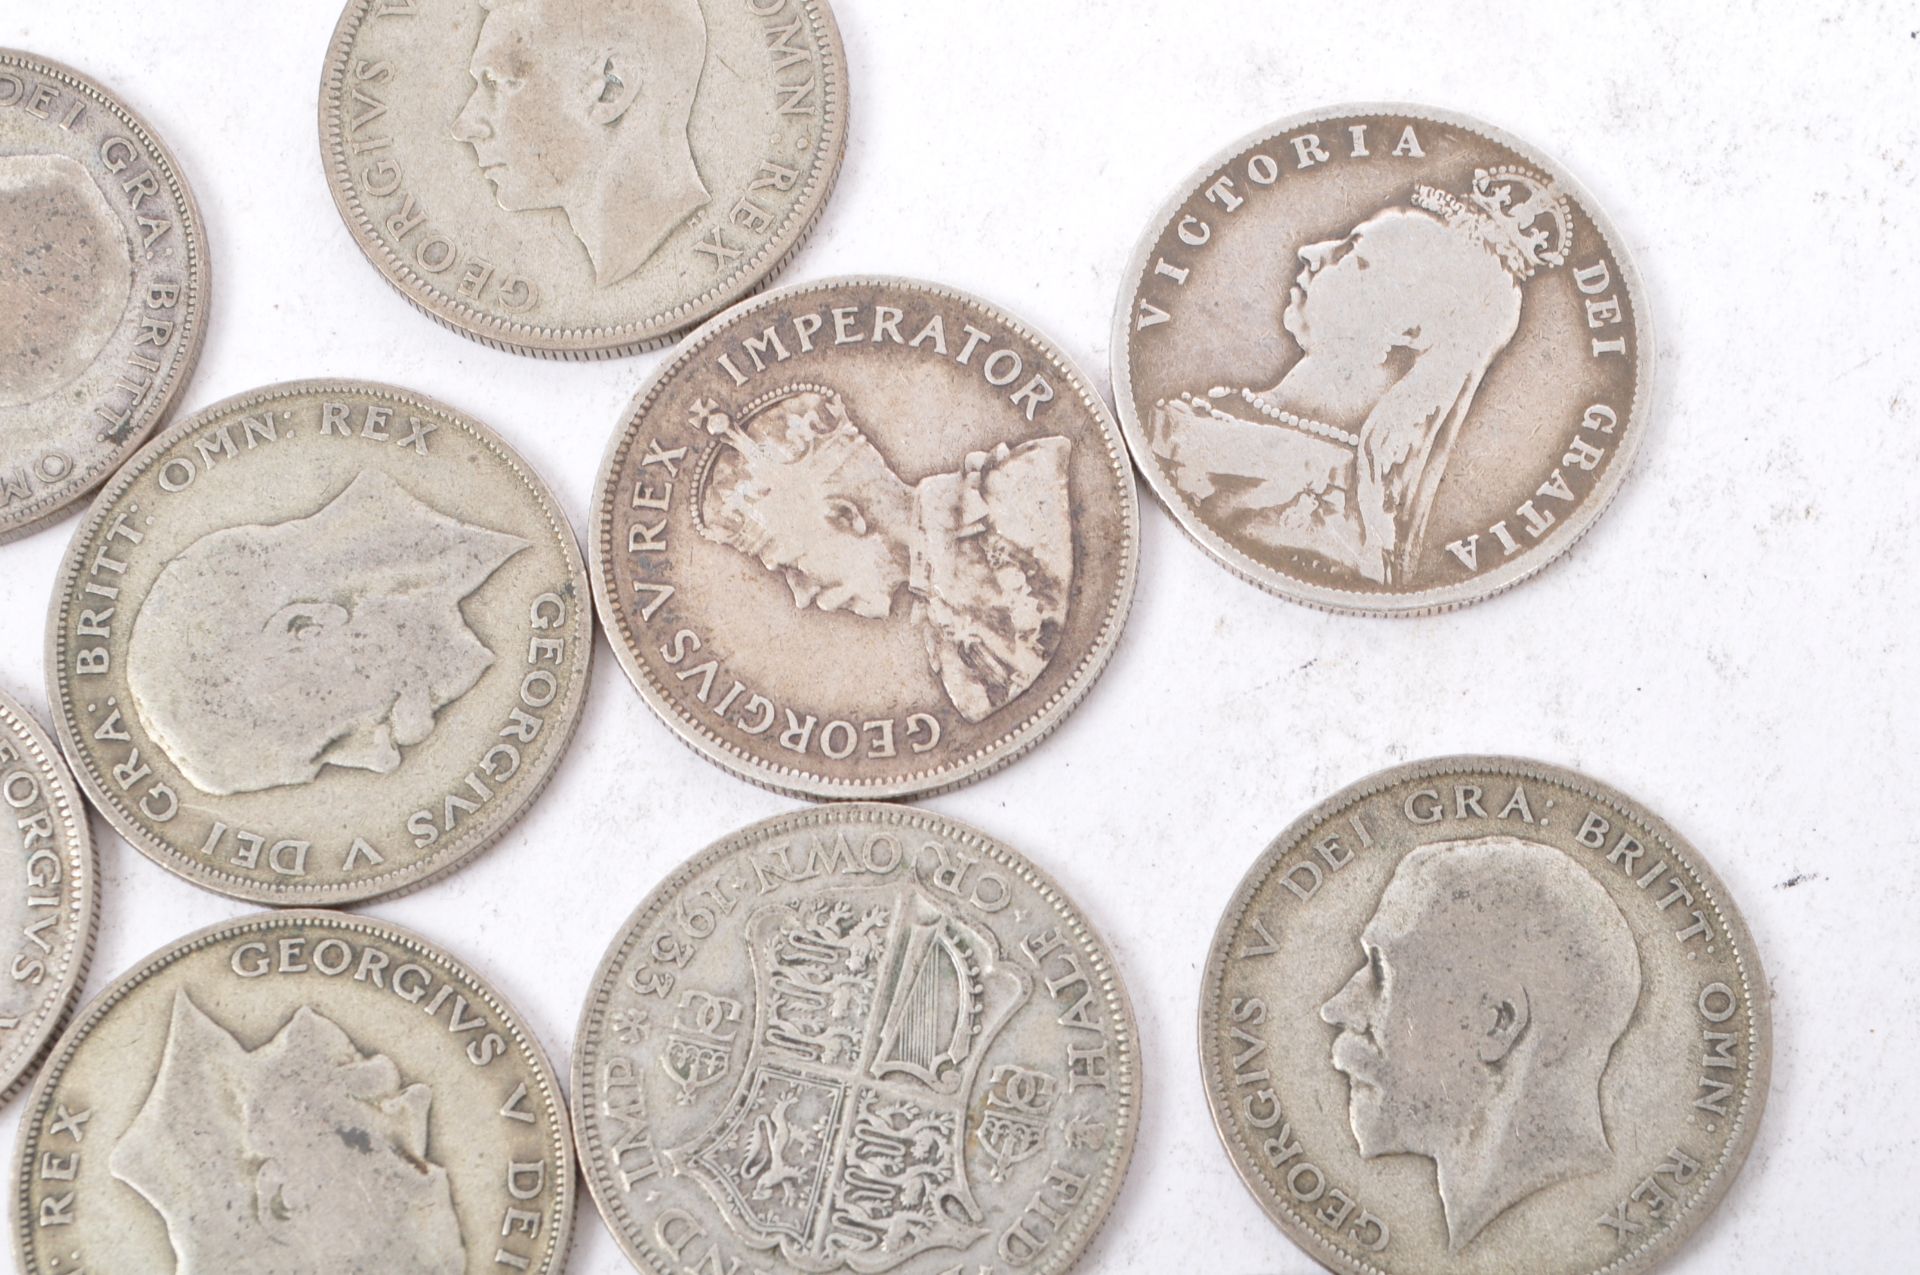 COLLECTION OF 12 X BRITISH CURRENCY 'CROWNS' COINAGE - Image 7 of 7